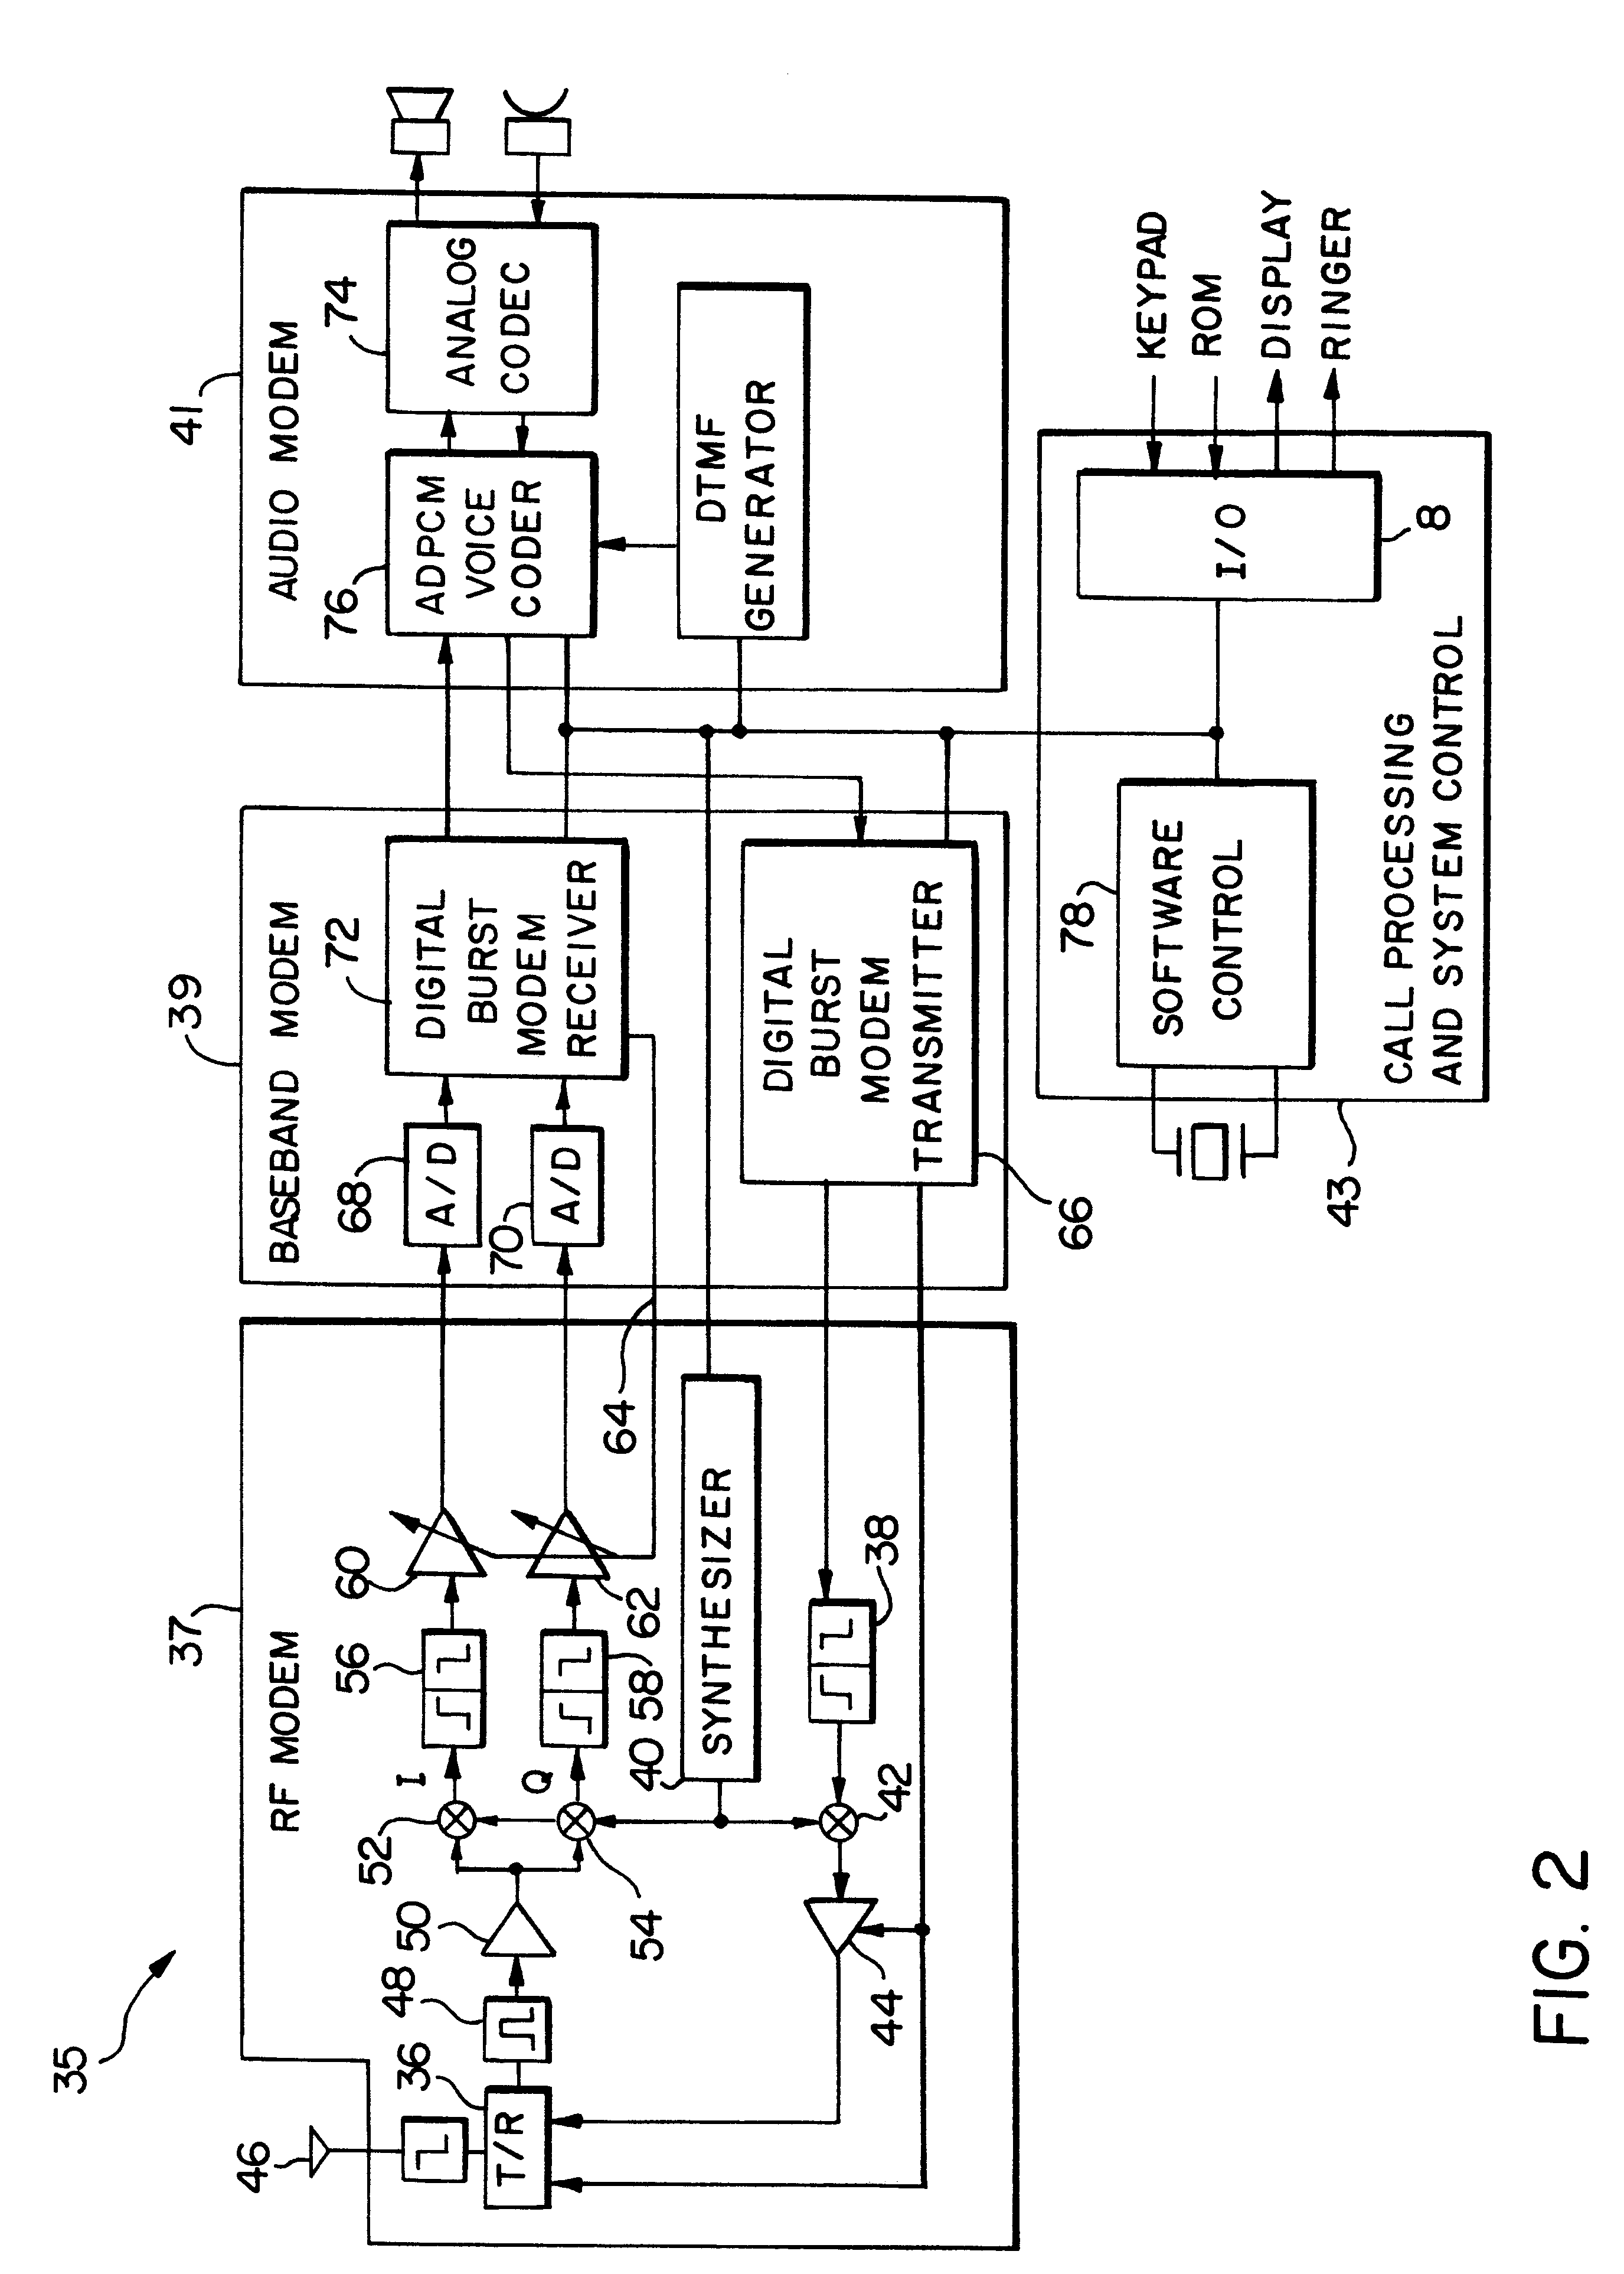 Gain imbalance compensation method and apparatus for a quadrature receiver